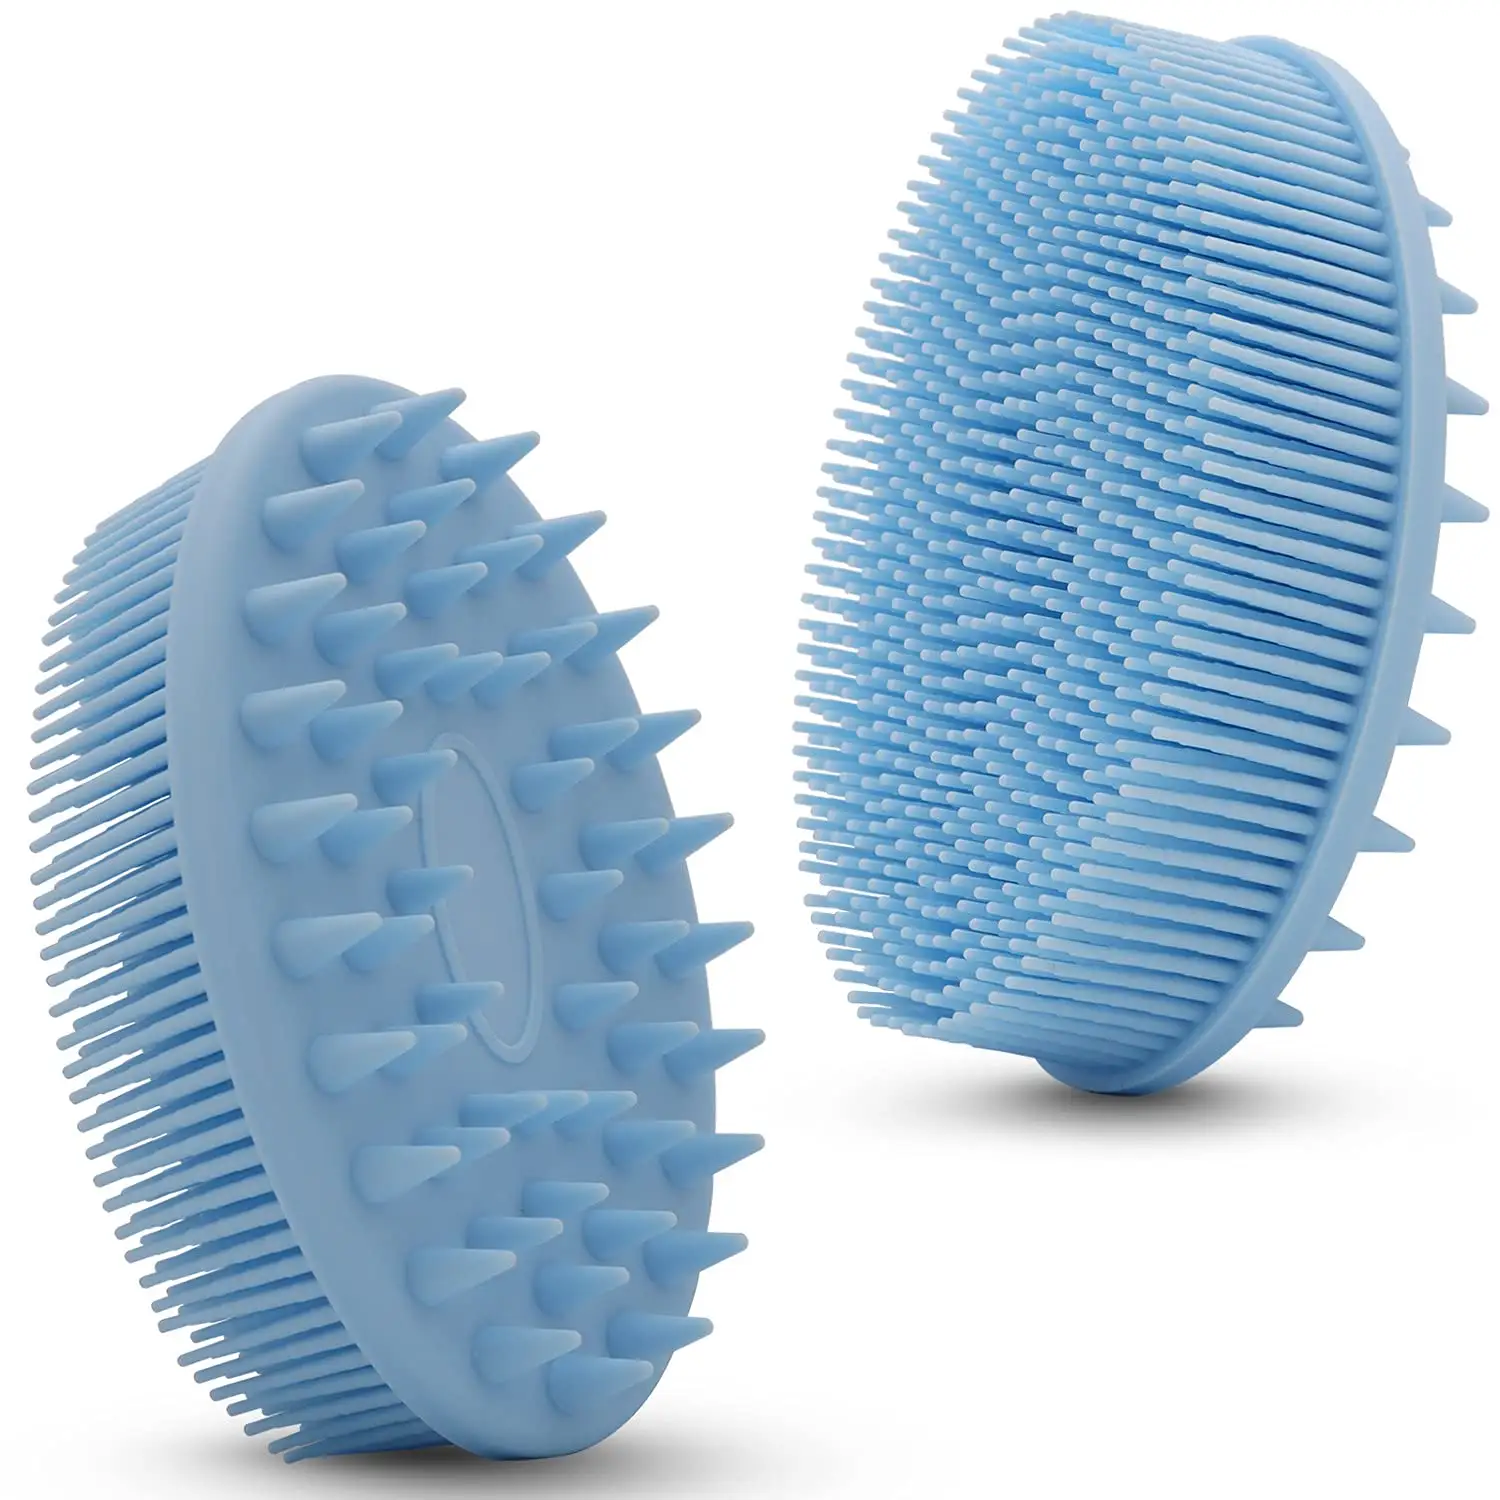 Upgrade 2 in 1 Bath and Shampoo Brush Silicone Body Scrubber for Use in Shower, Exfoliating Body Brush, Premium Silicone Loofah